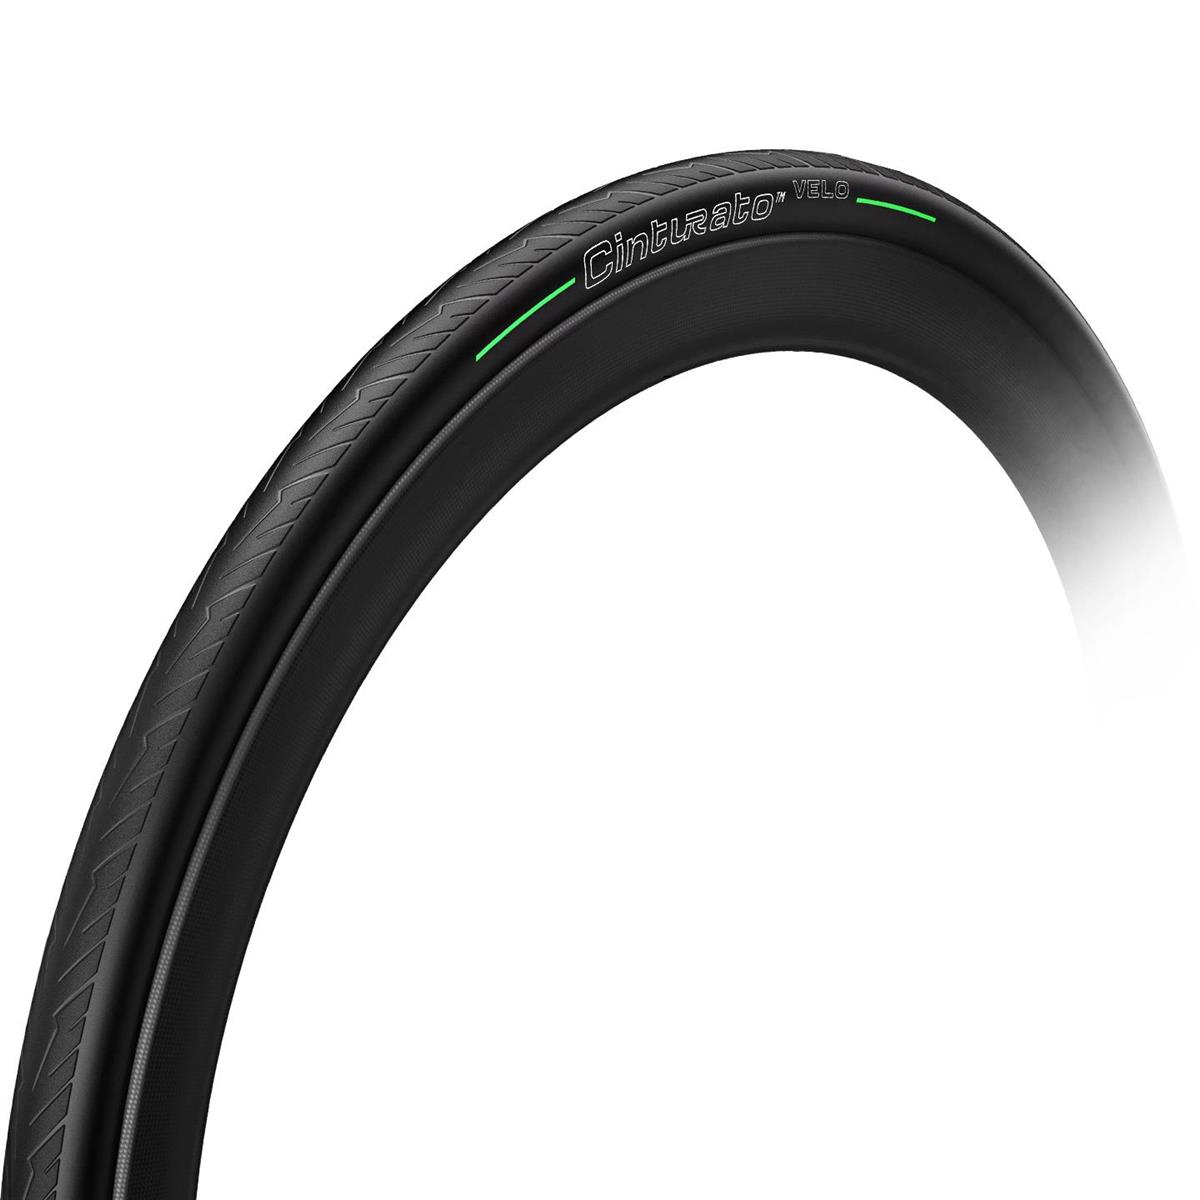 Cubierta Cinturato Velo Tlr 700x26c Tubeless Ready Negro